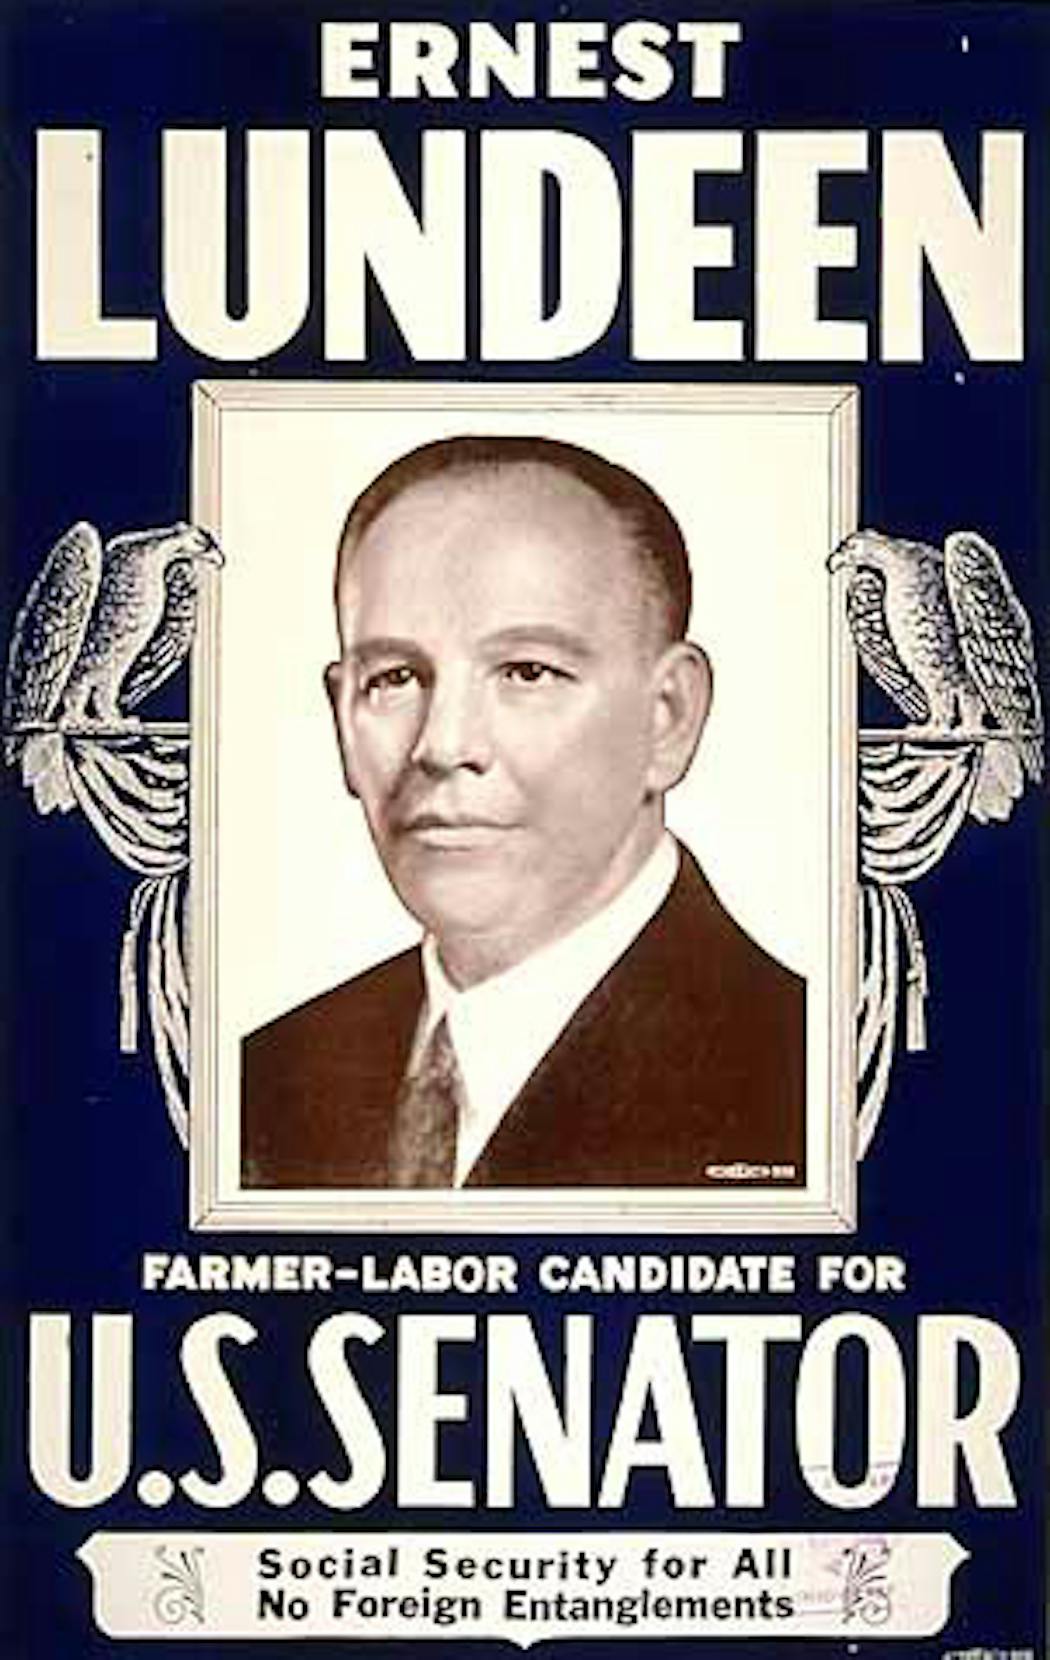 A campaign poster for Lundeen's 1936 U.S. Senate campaign.